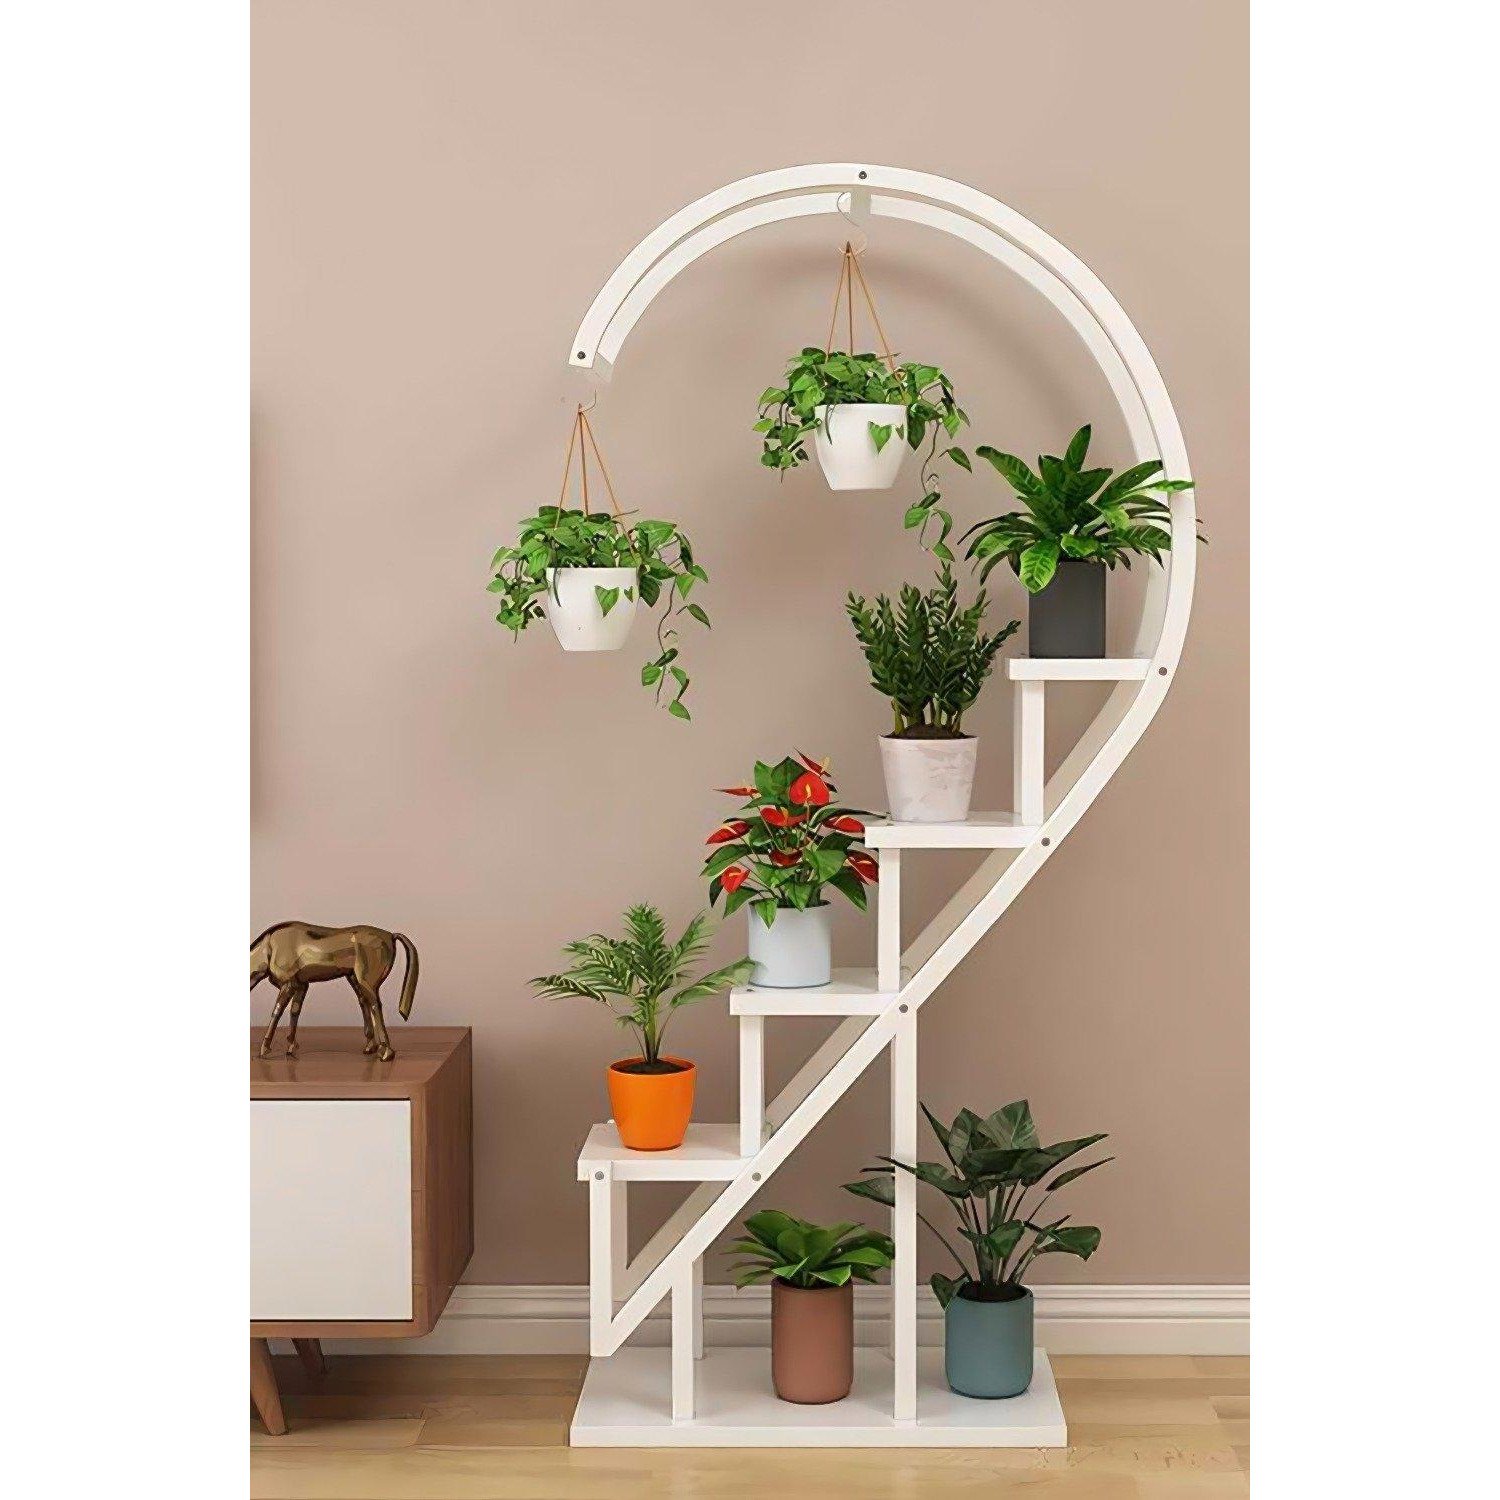 4 tier Myrna Free Form Multi Tiered Plant Stand - image 1